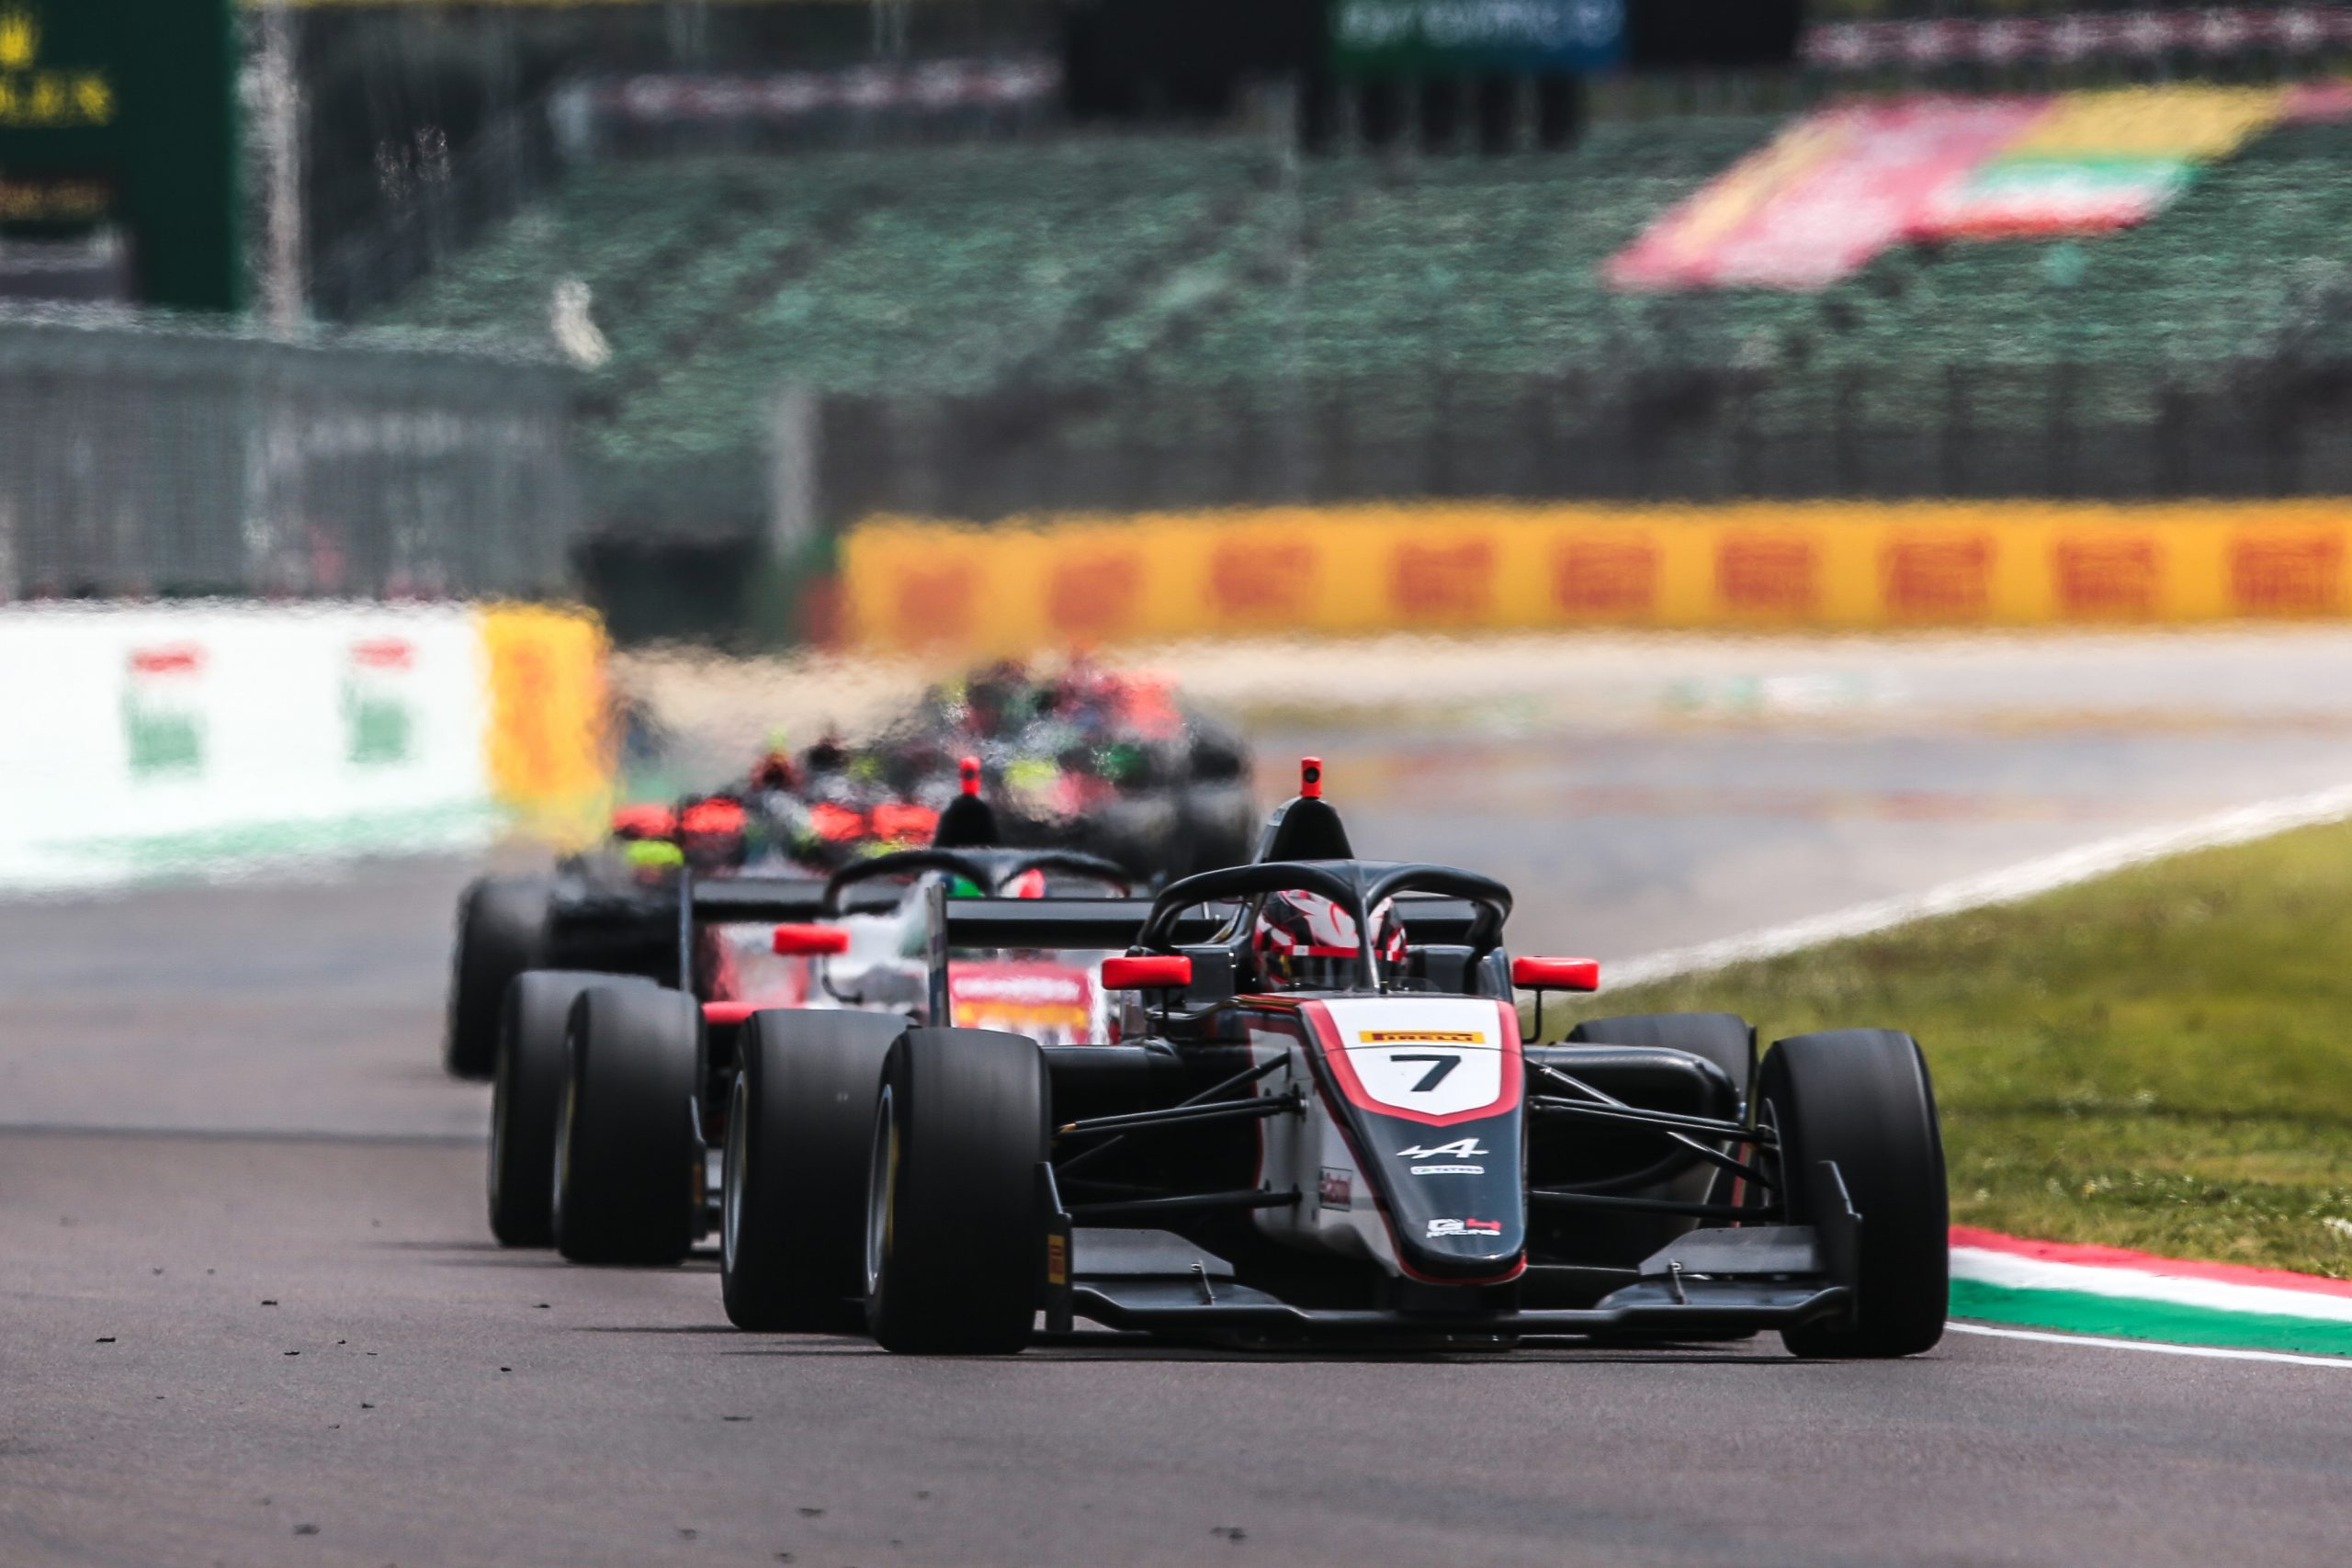 G4 Racing experiences positive start in first 2021 race outing